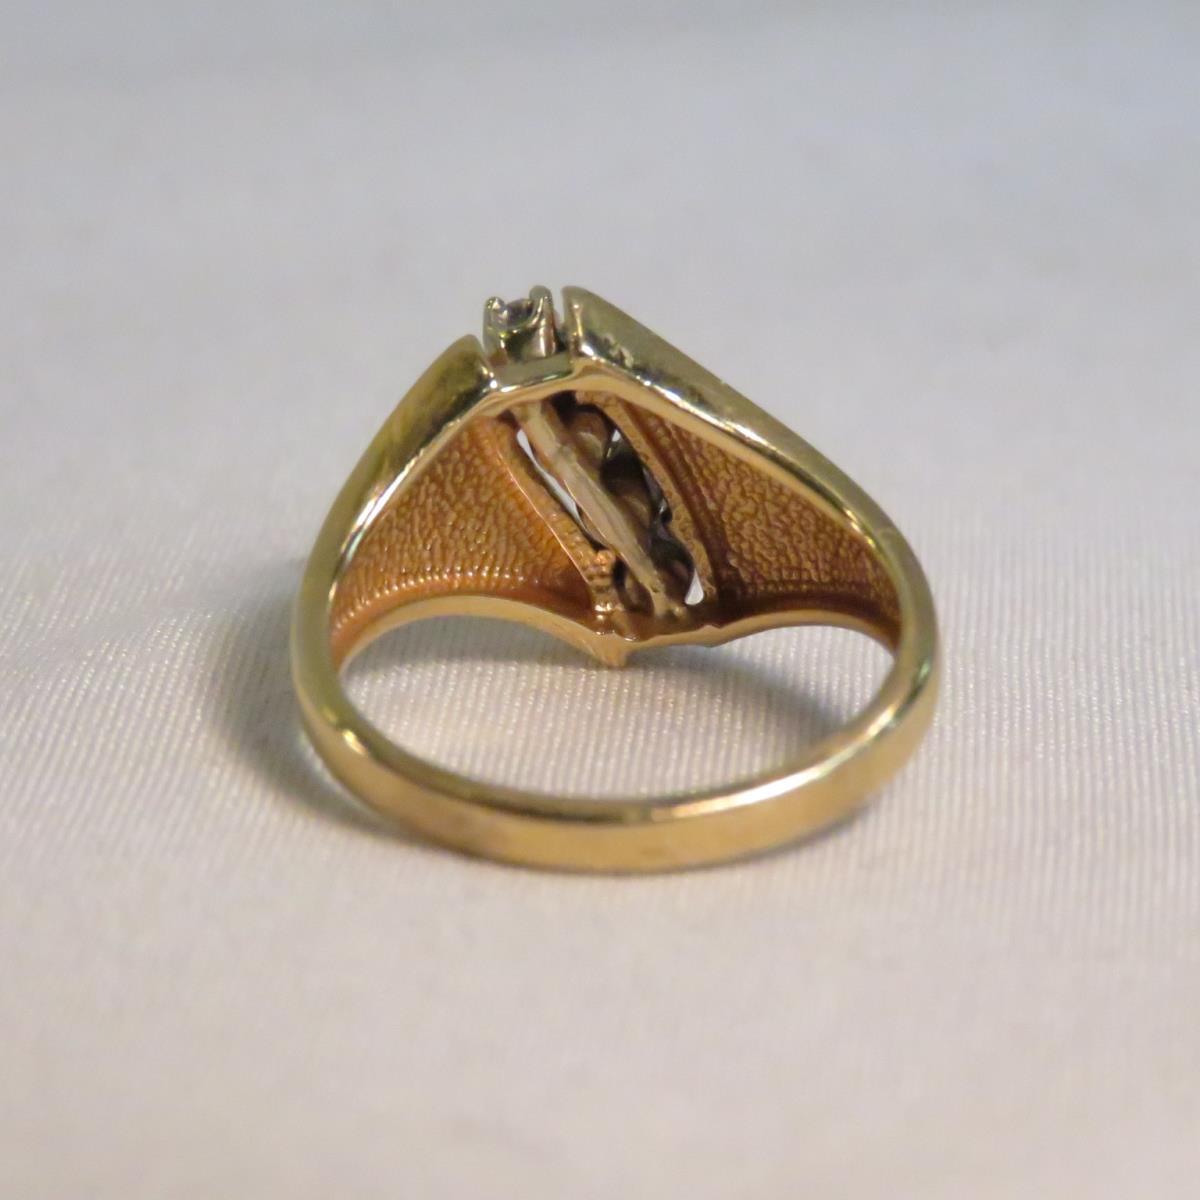 14kt gold ring with diamonds size 6 1/4, 4gtw